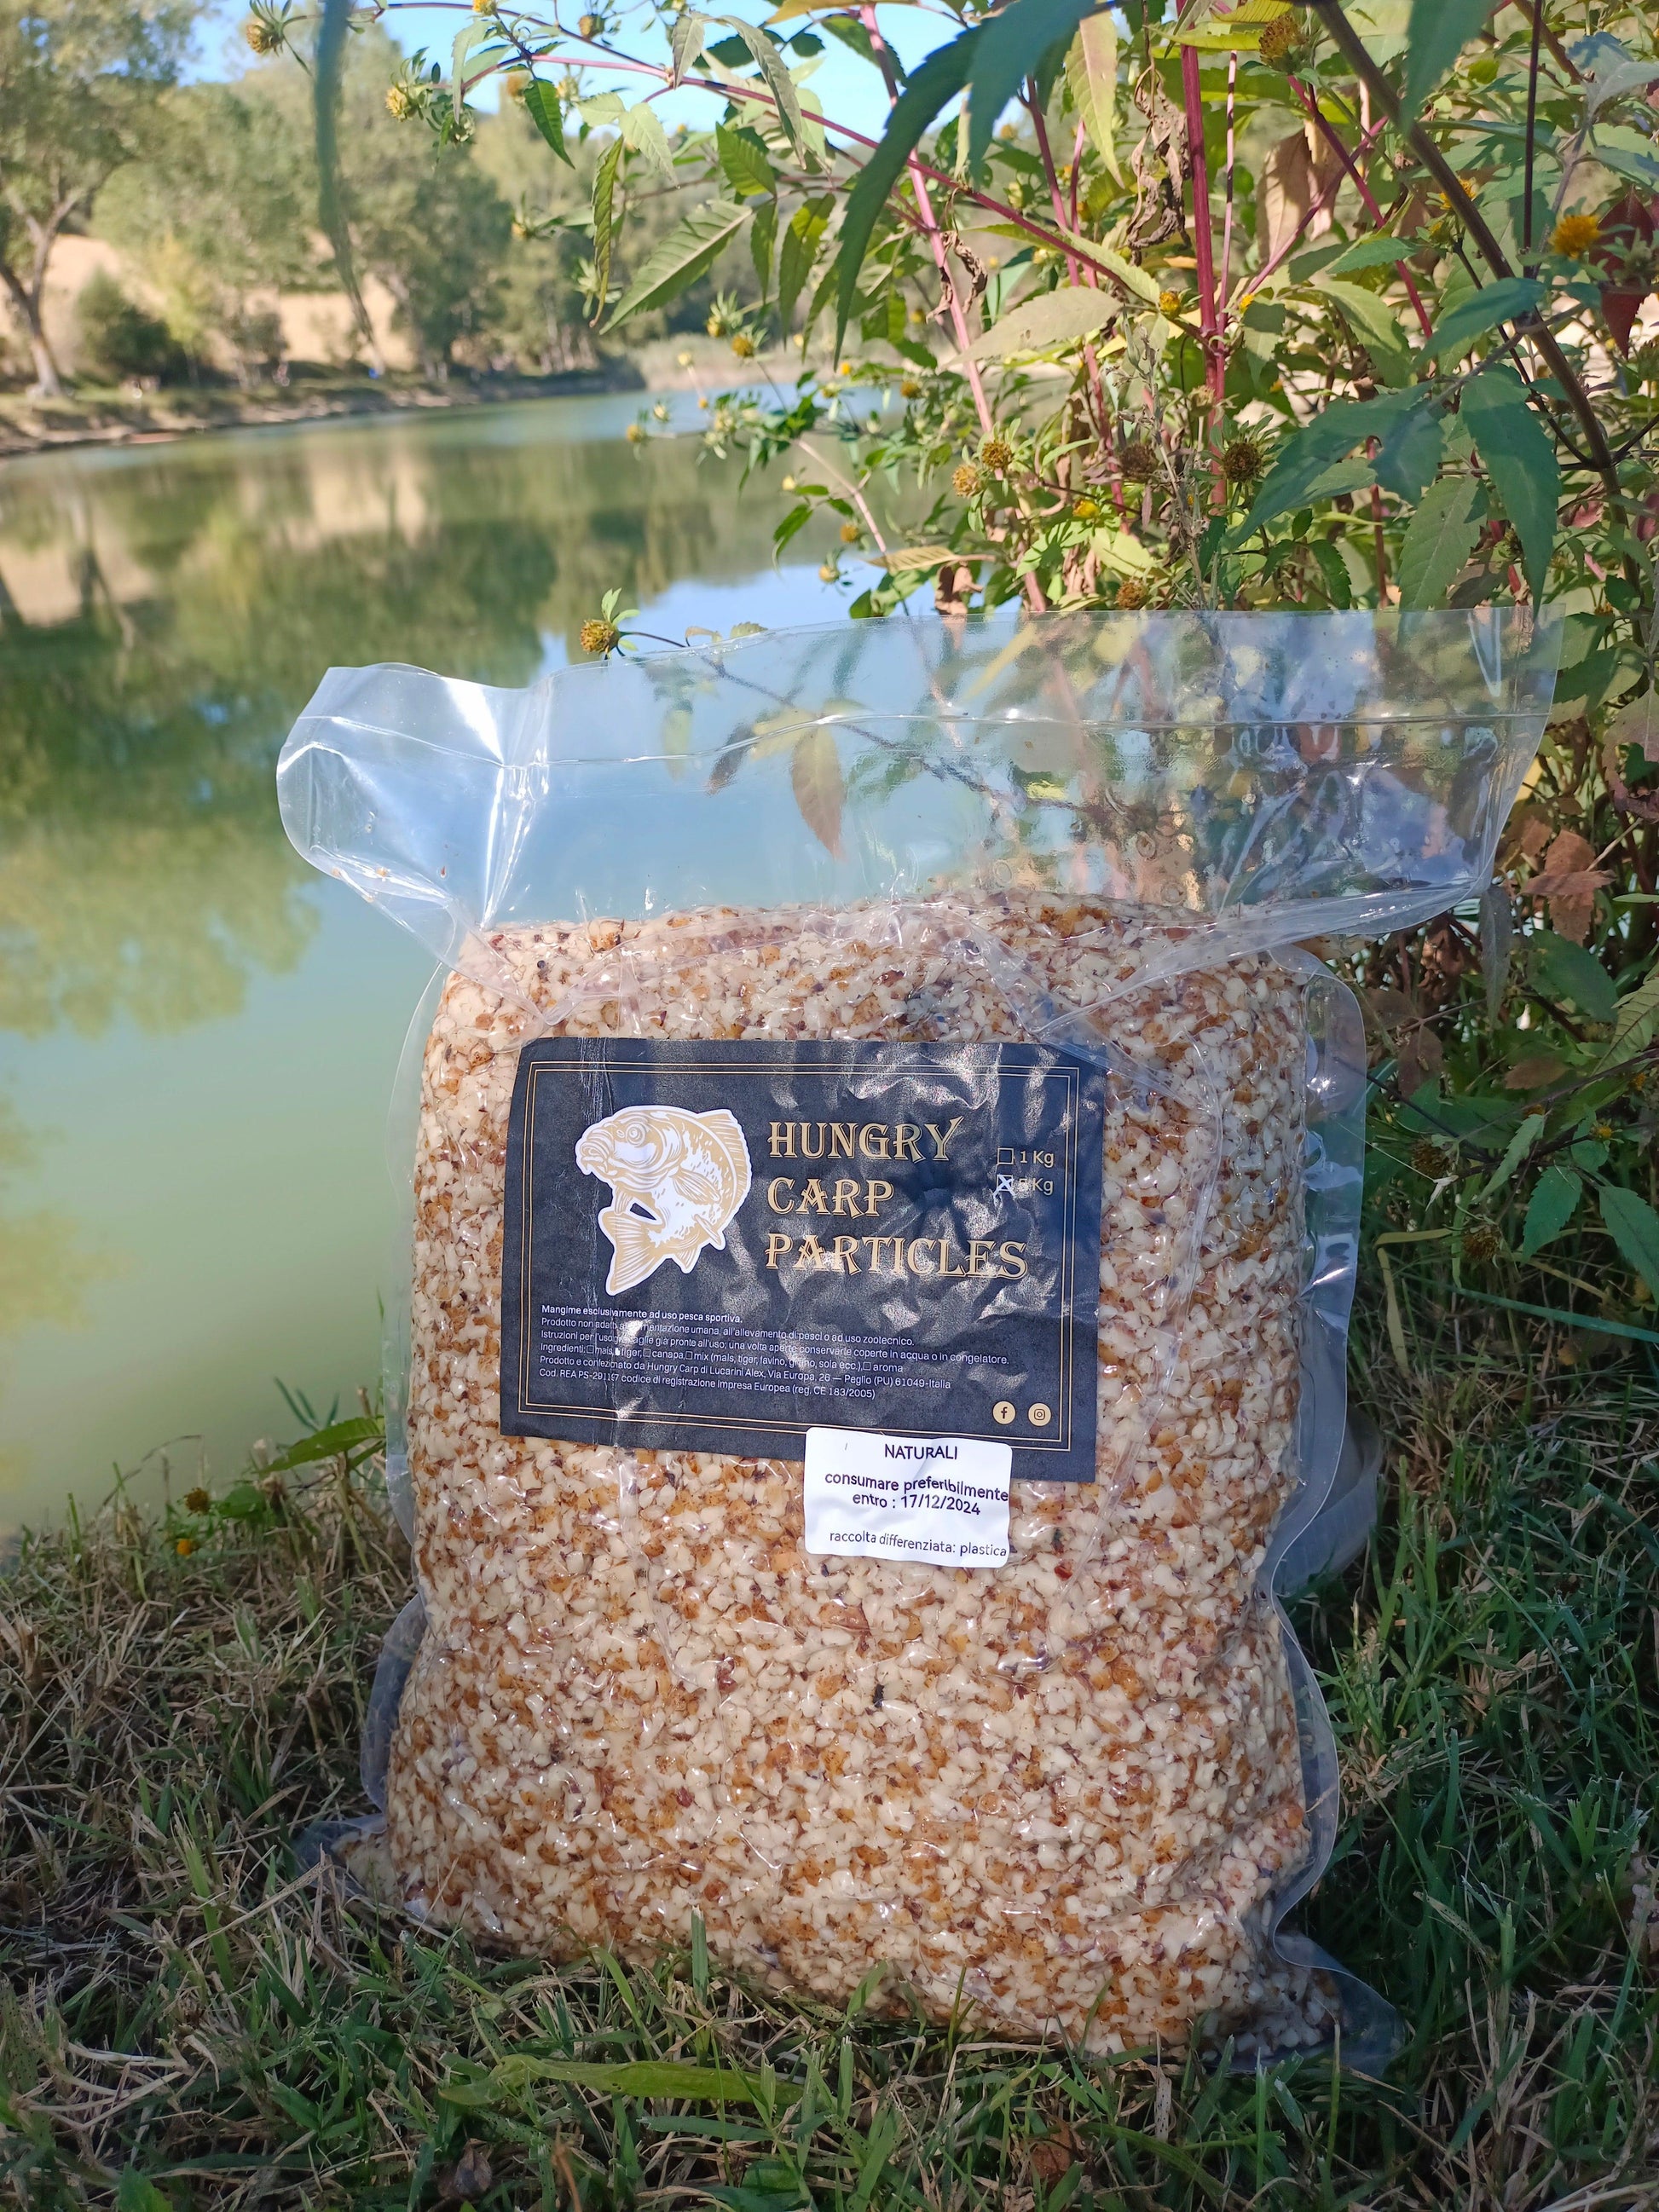 Crushed tiger nuts cotte naturali - Hungry carp particles